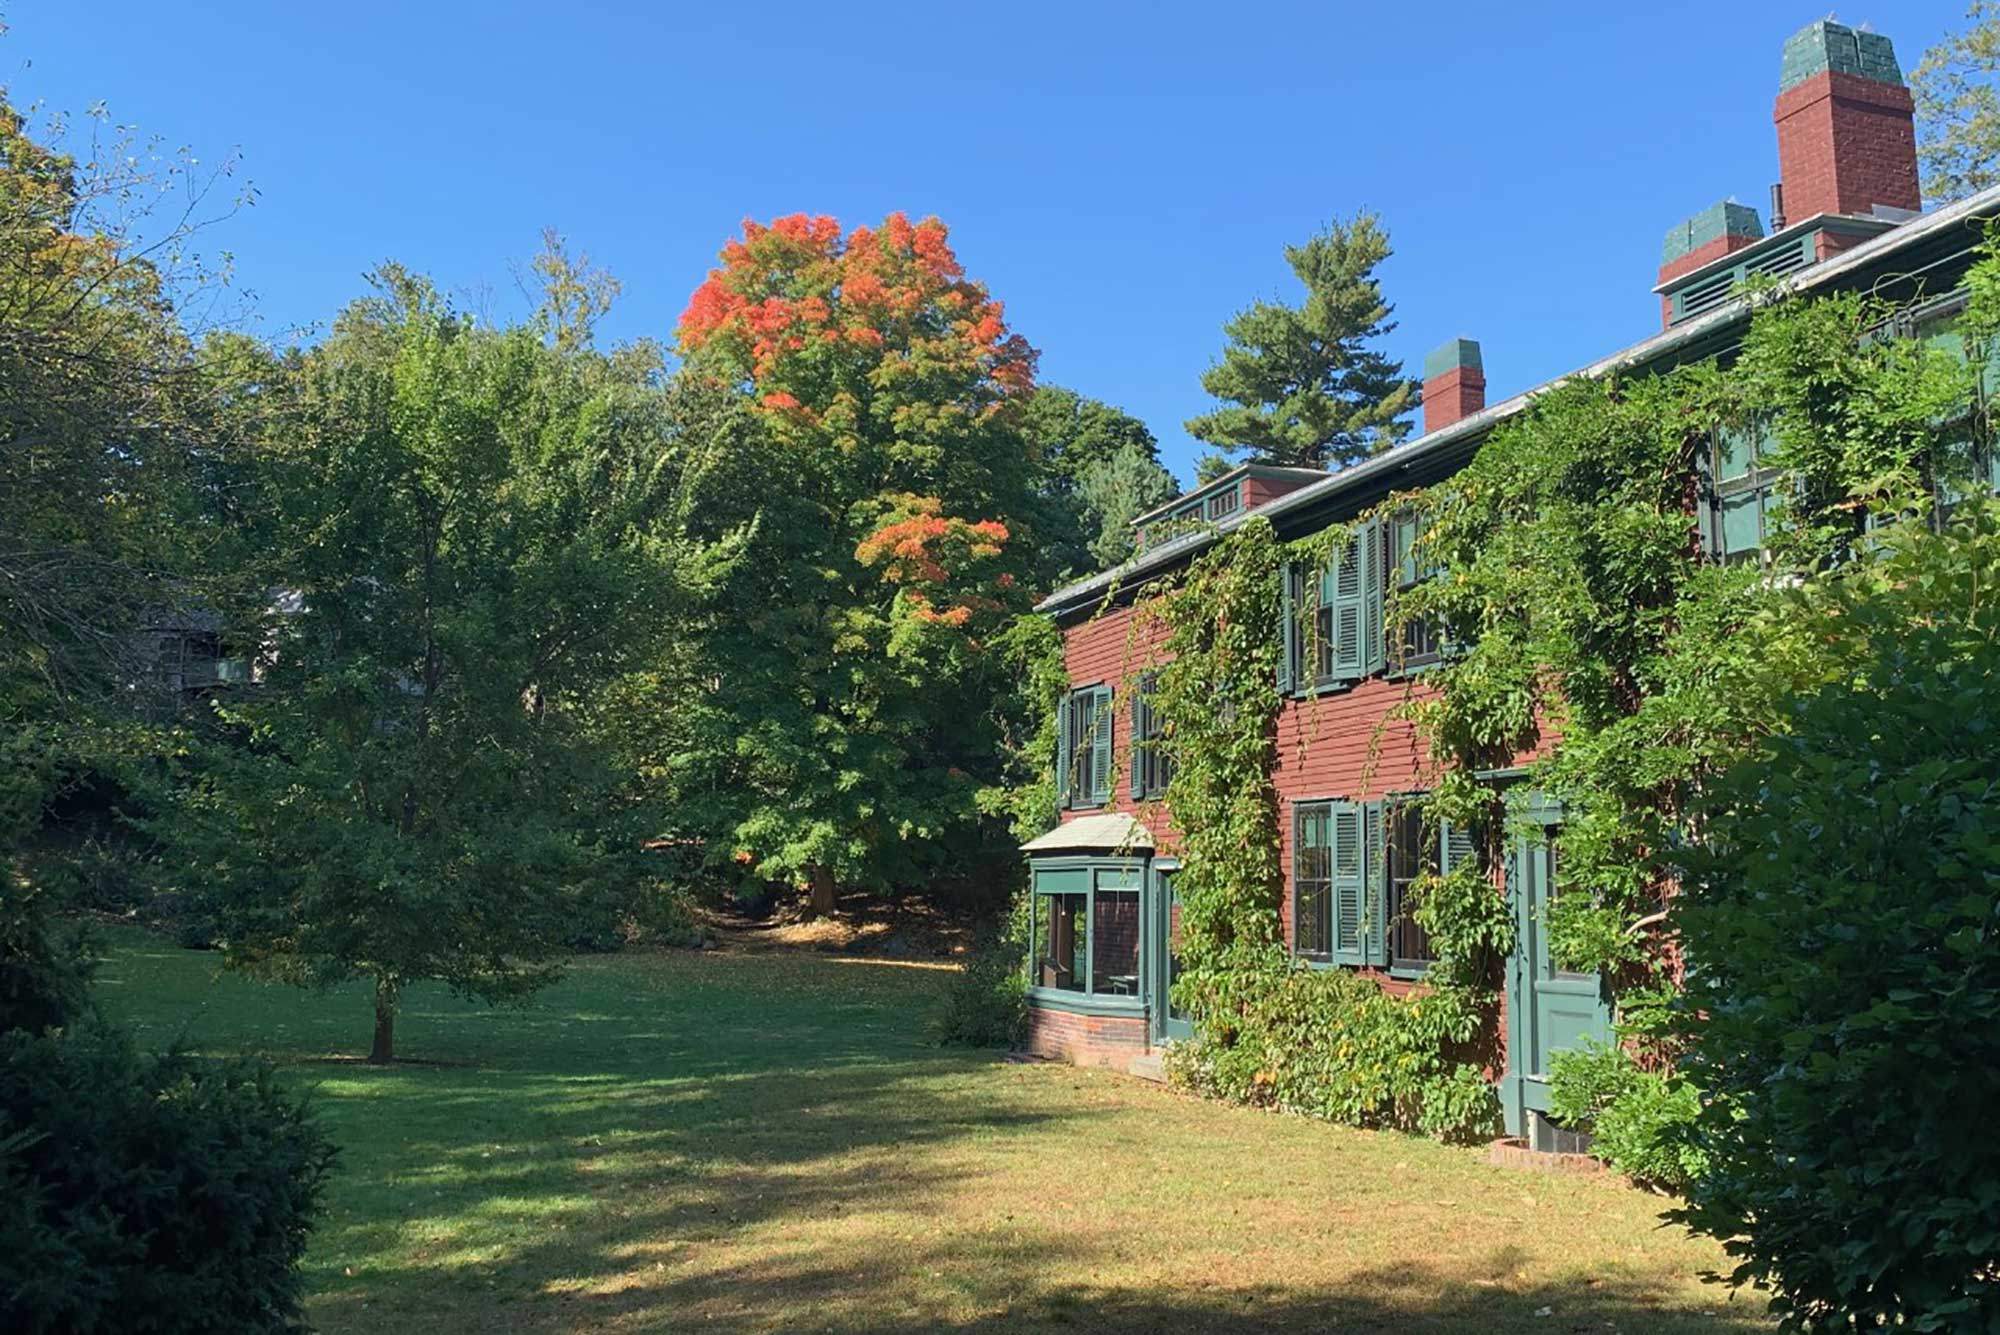 Photo of the old home of Frederick Law Olmsted in Brookline. The leaves on the trees behind the crimson-colored house are starting to turn.